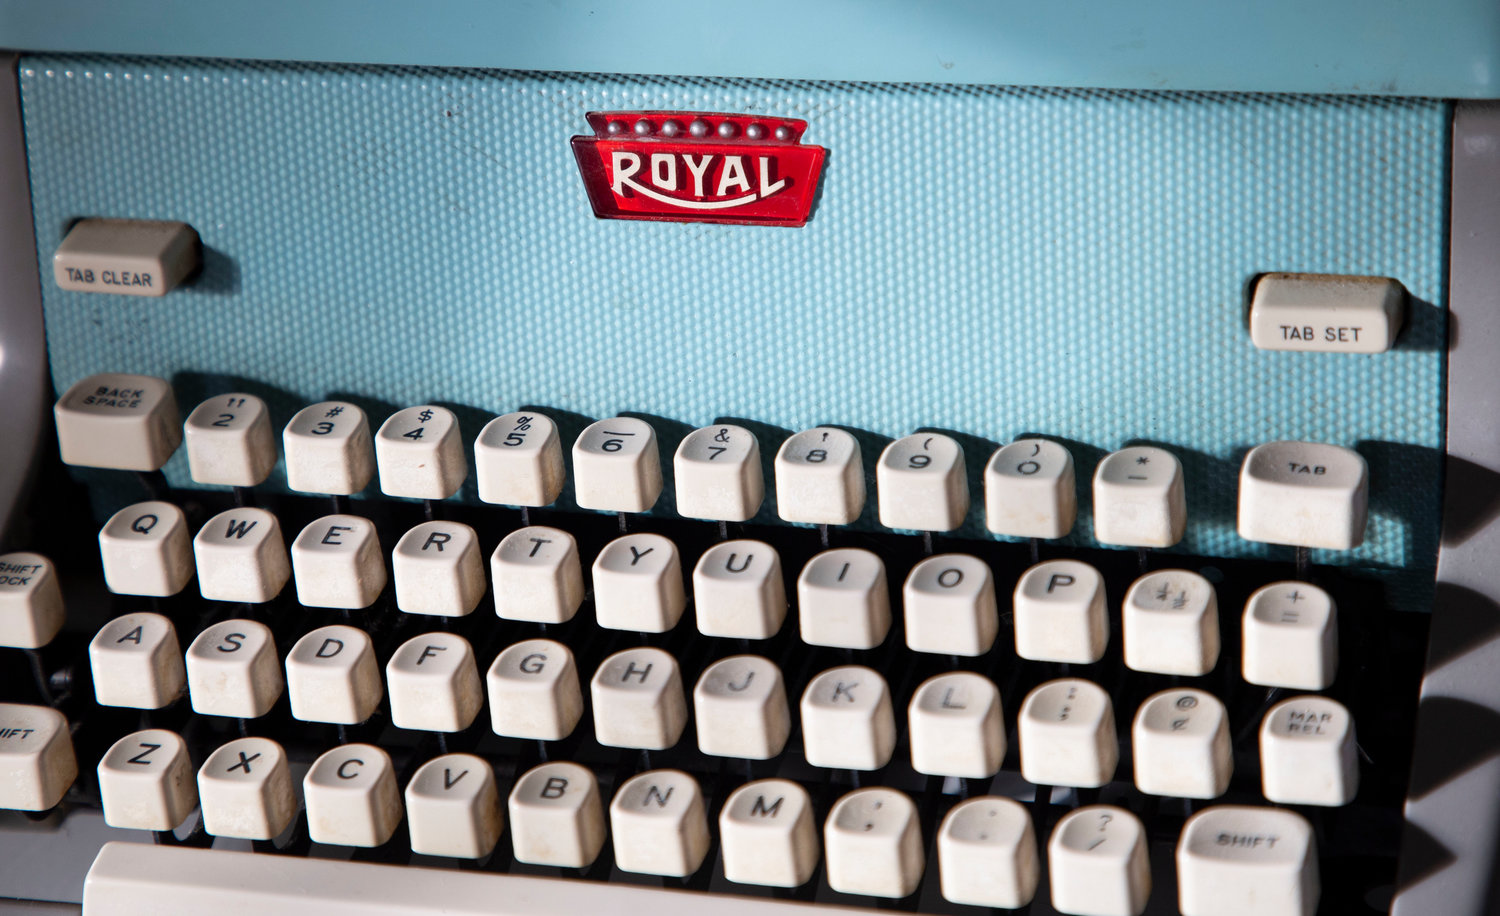 This Royal typewriter is one of Alayne’s favorites. Similar to one her grandmother used to type recipes on index cards, it is the cornerstone of her collection.